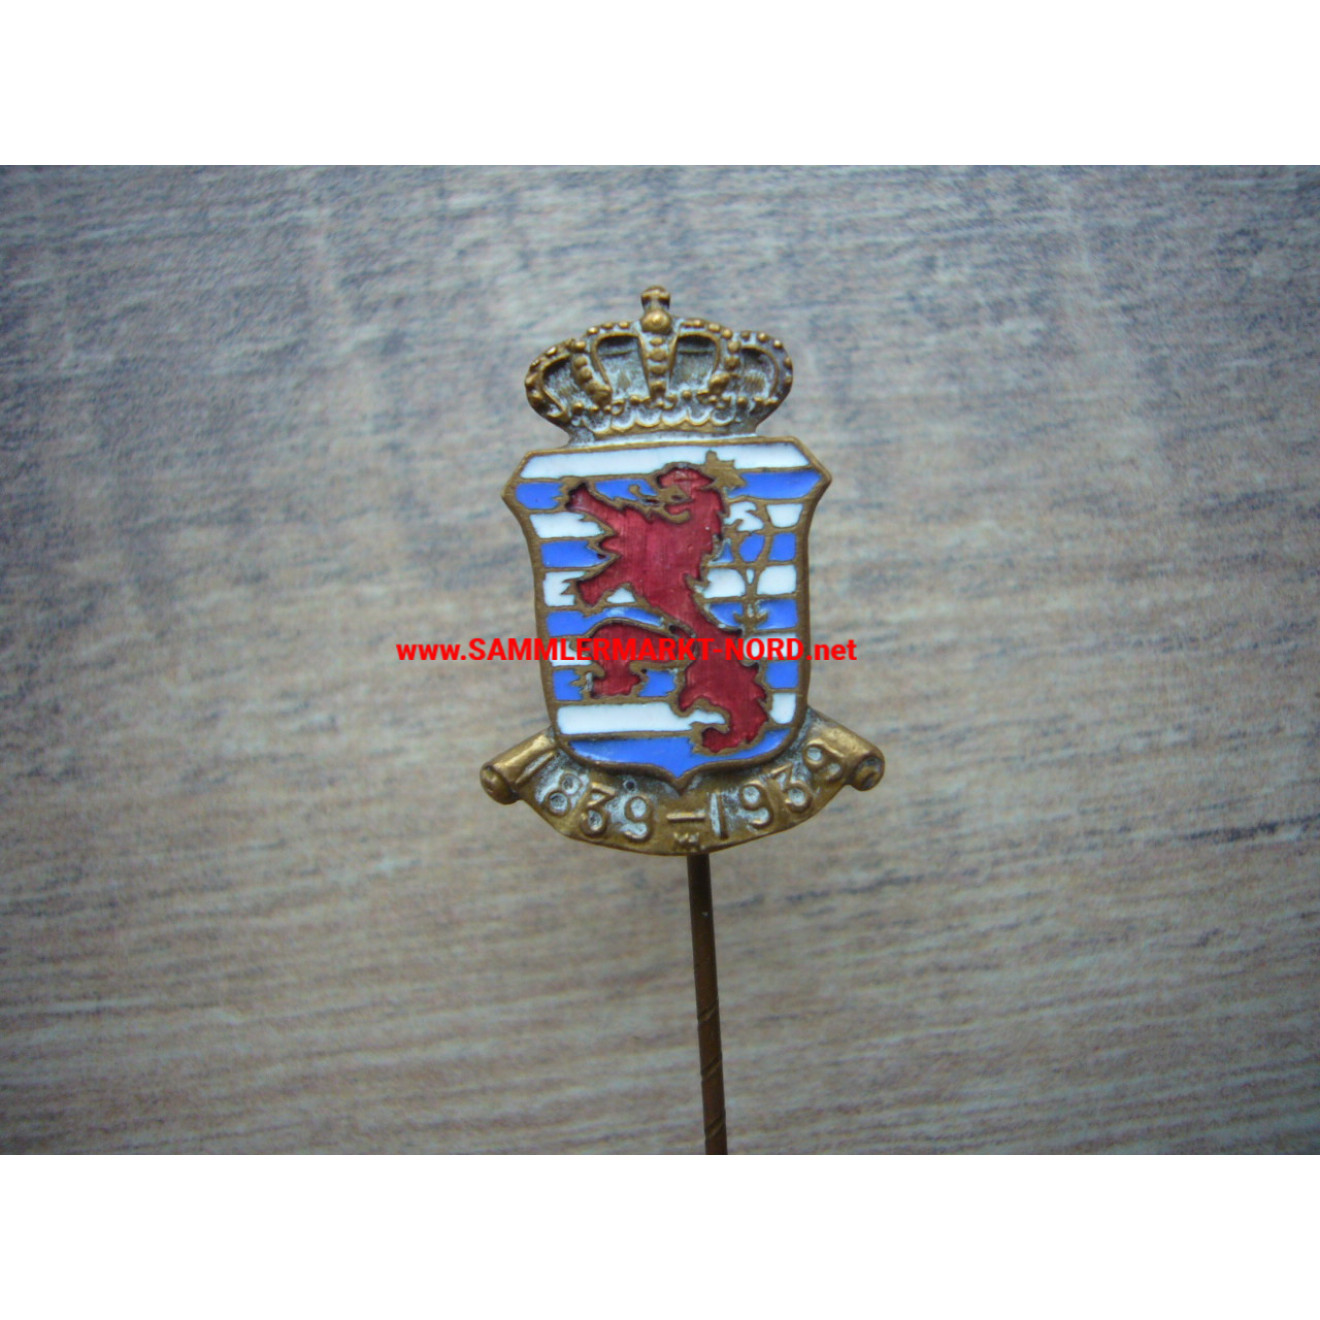 Luxembourg - Jubilee pin for 100 years of independence 1839 - 1939